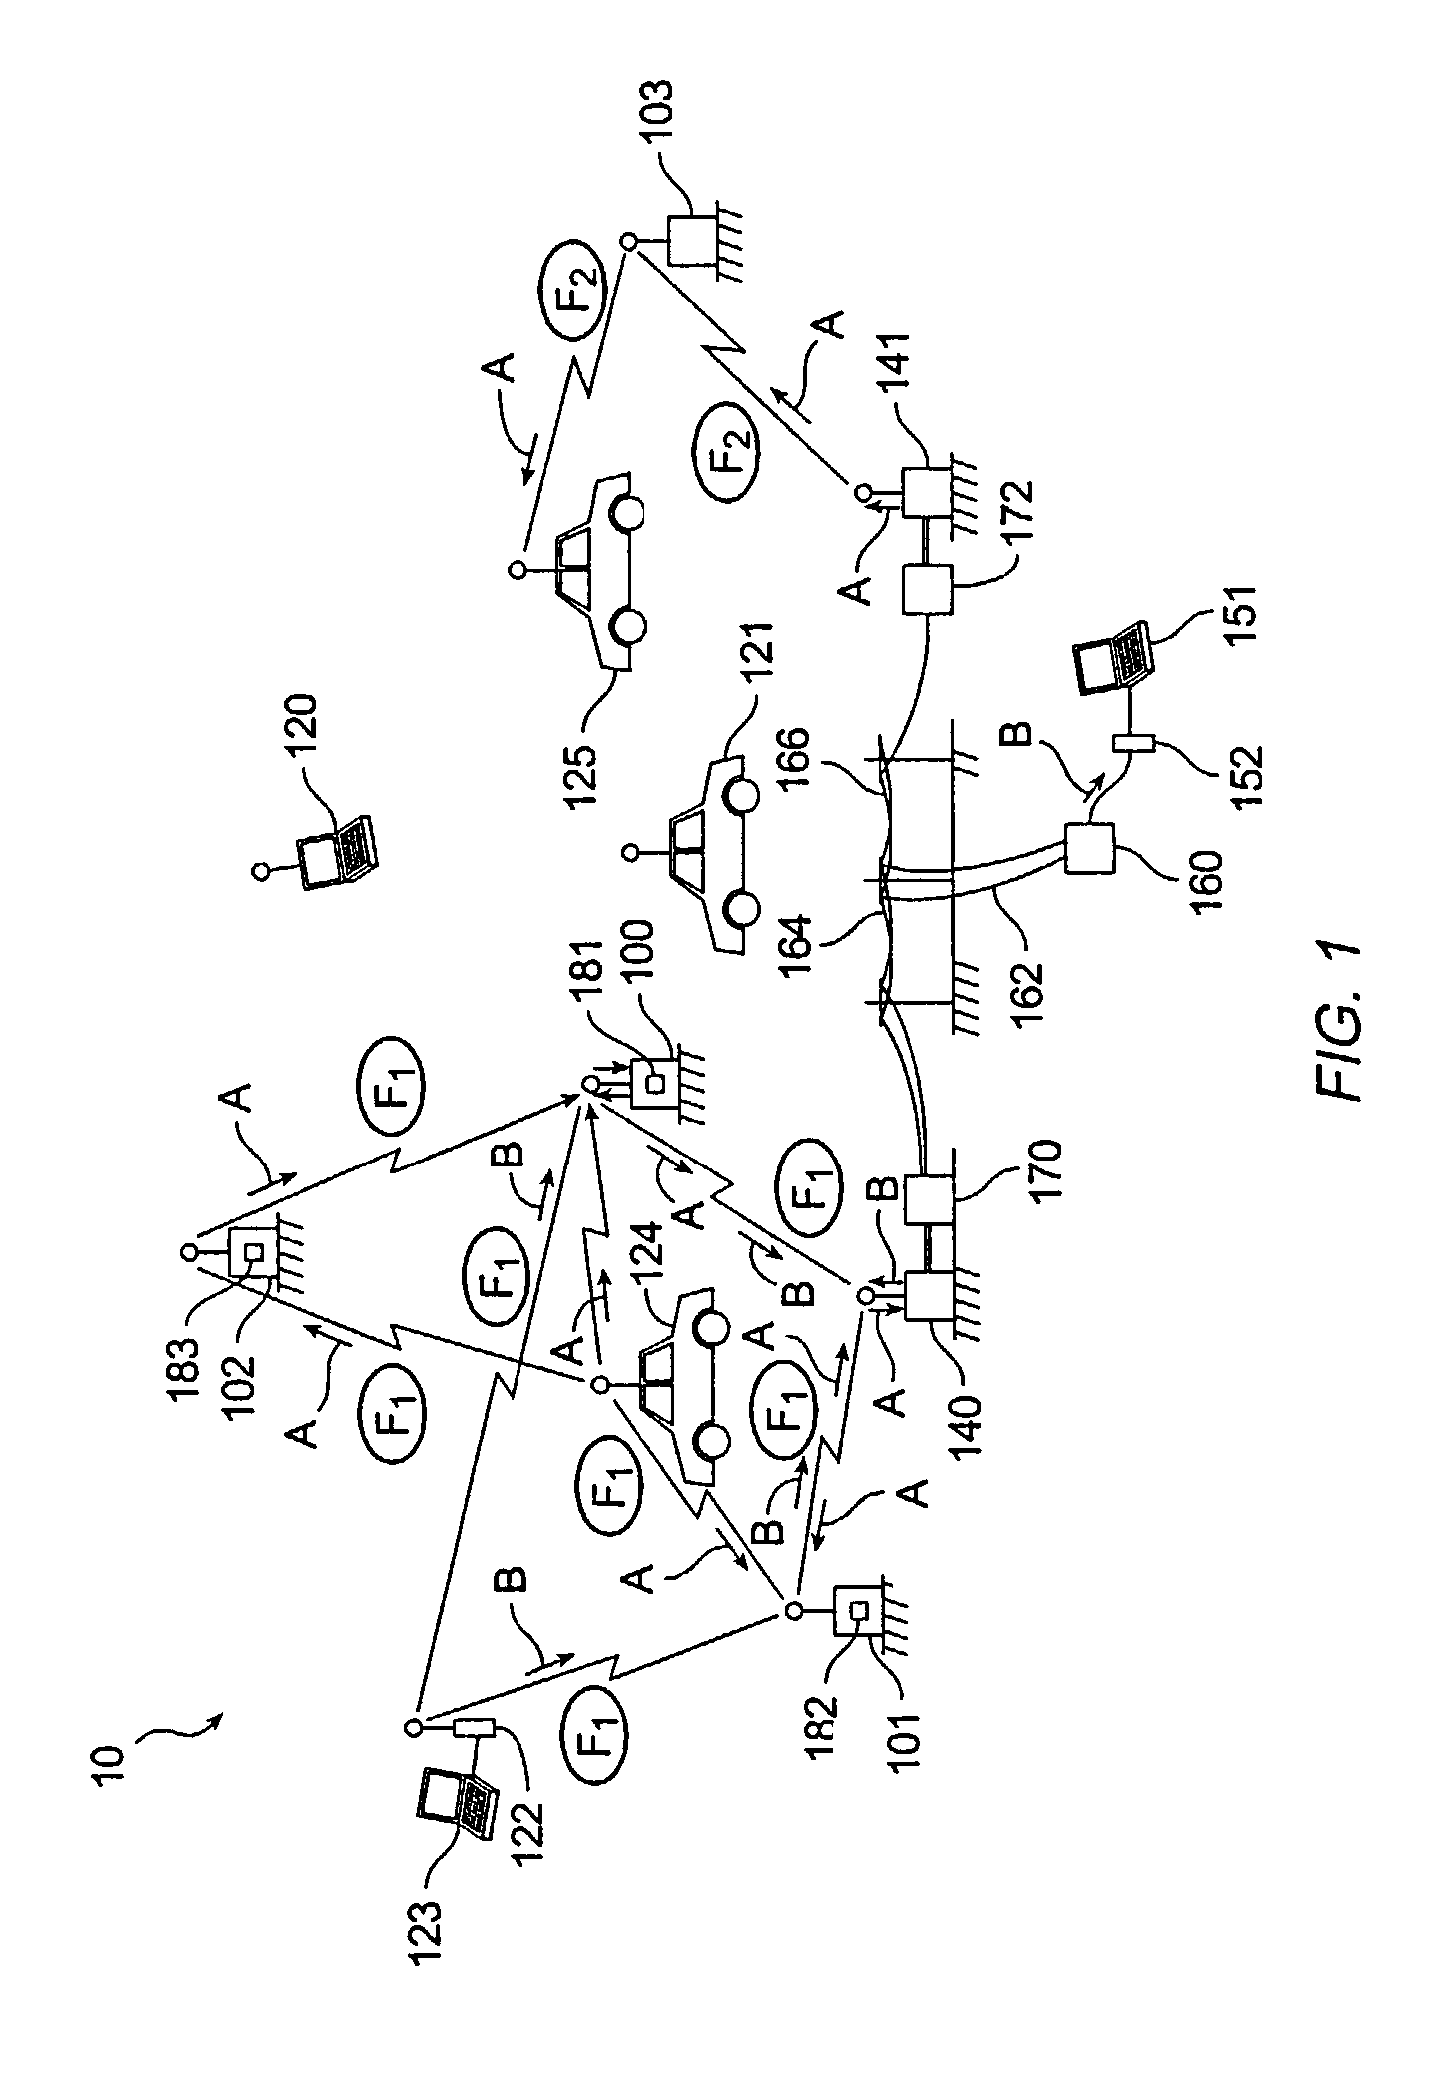 Method for enhancing mobility in a wireless mesh network